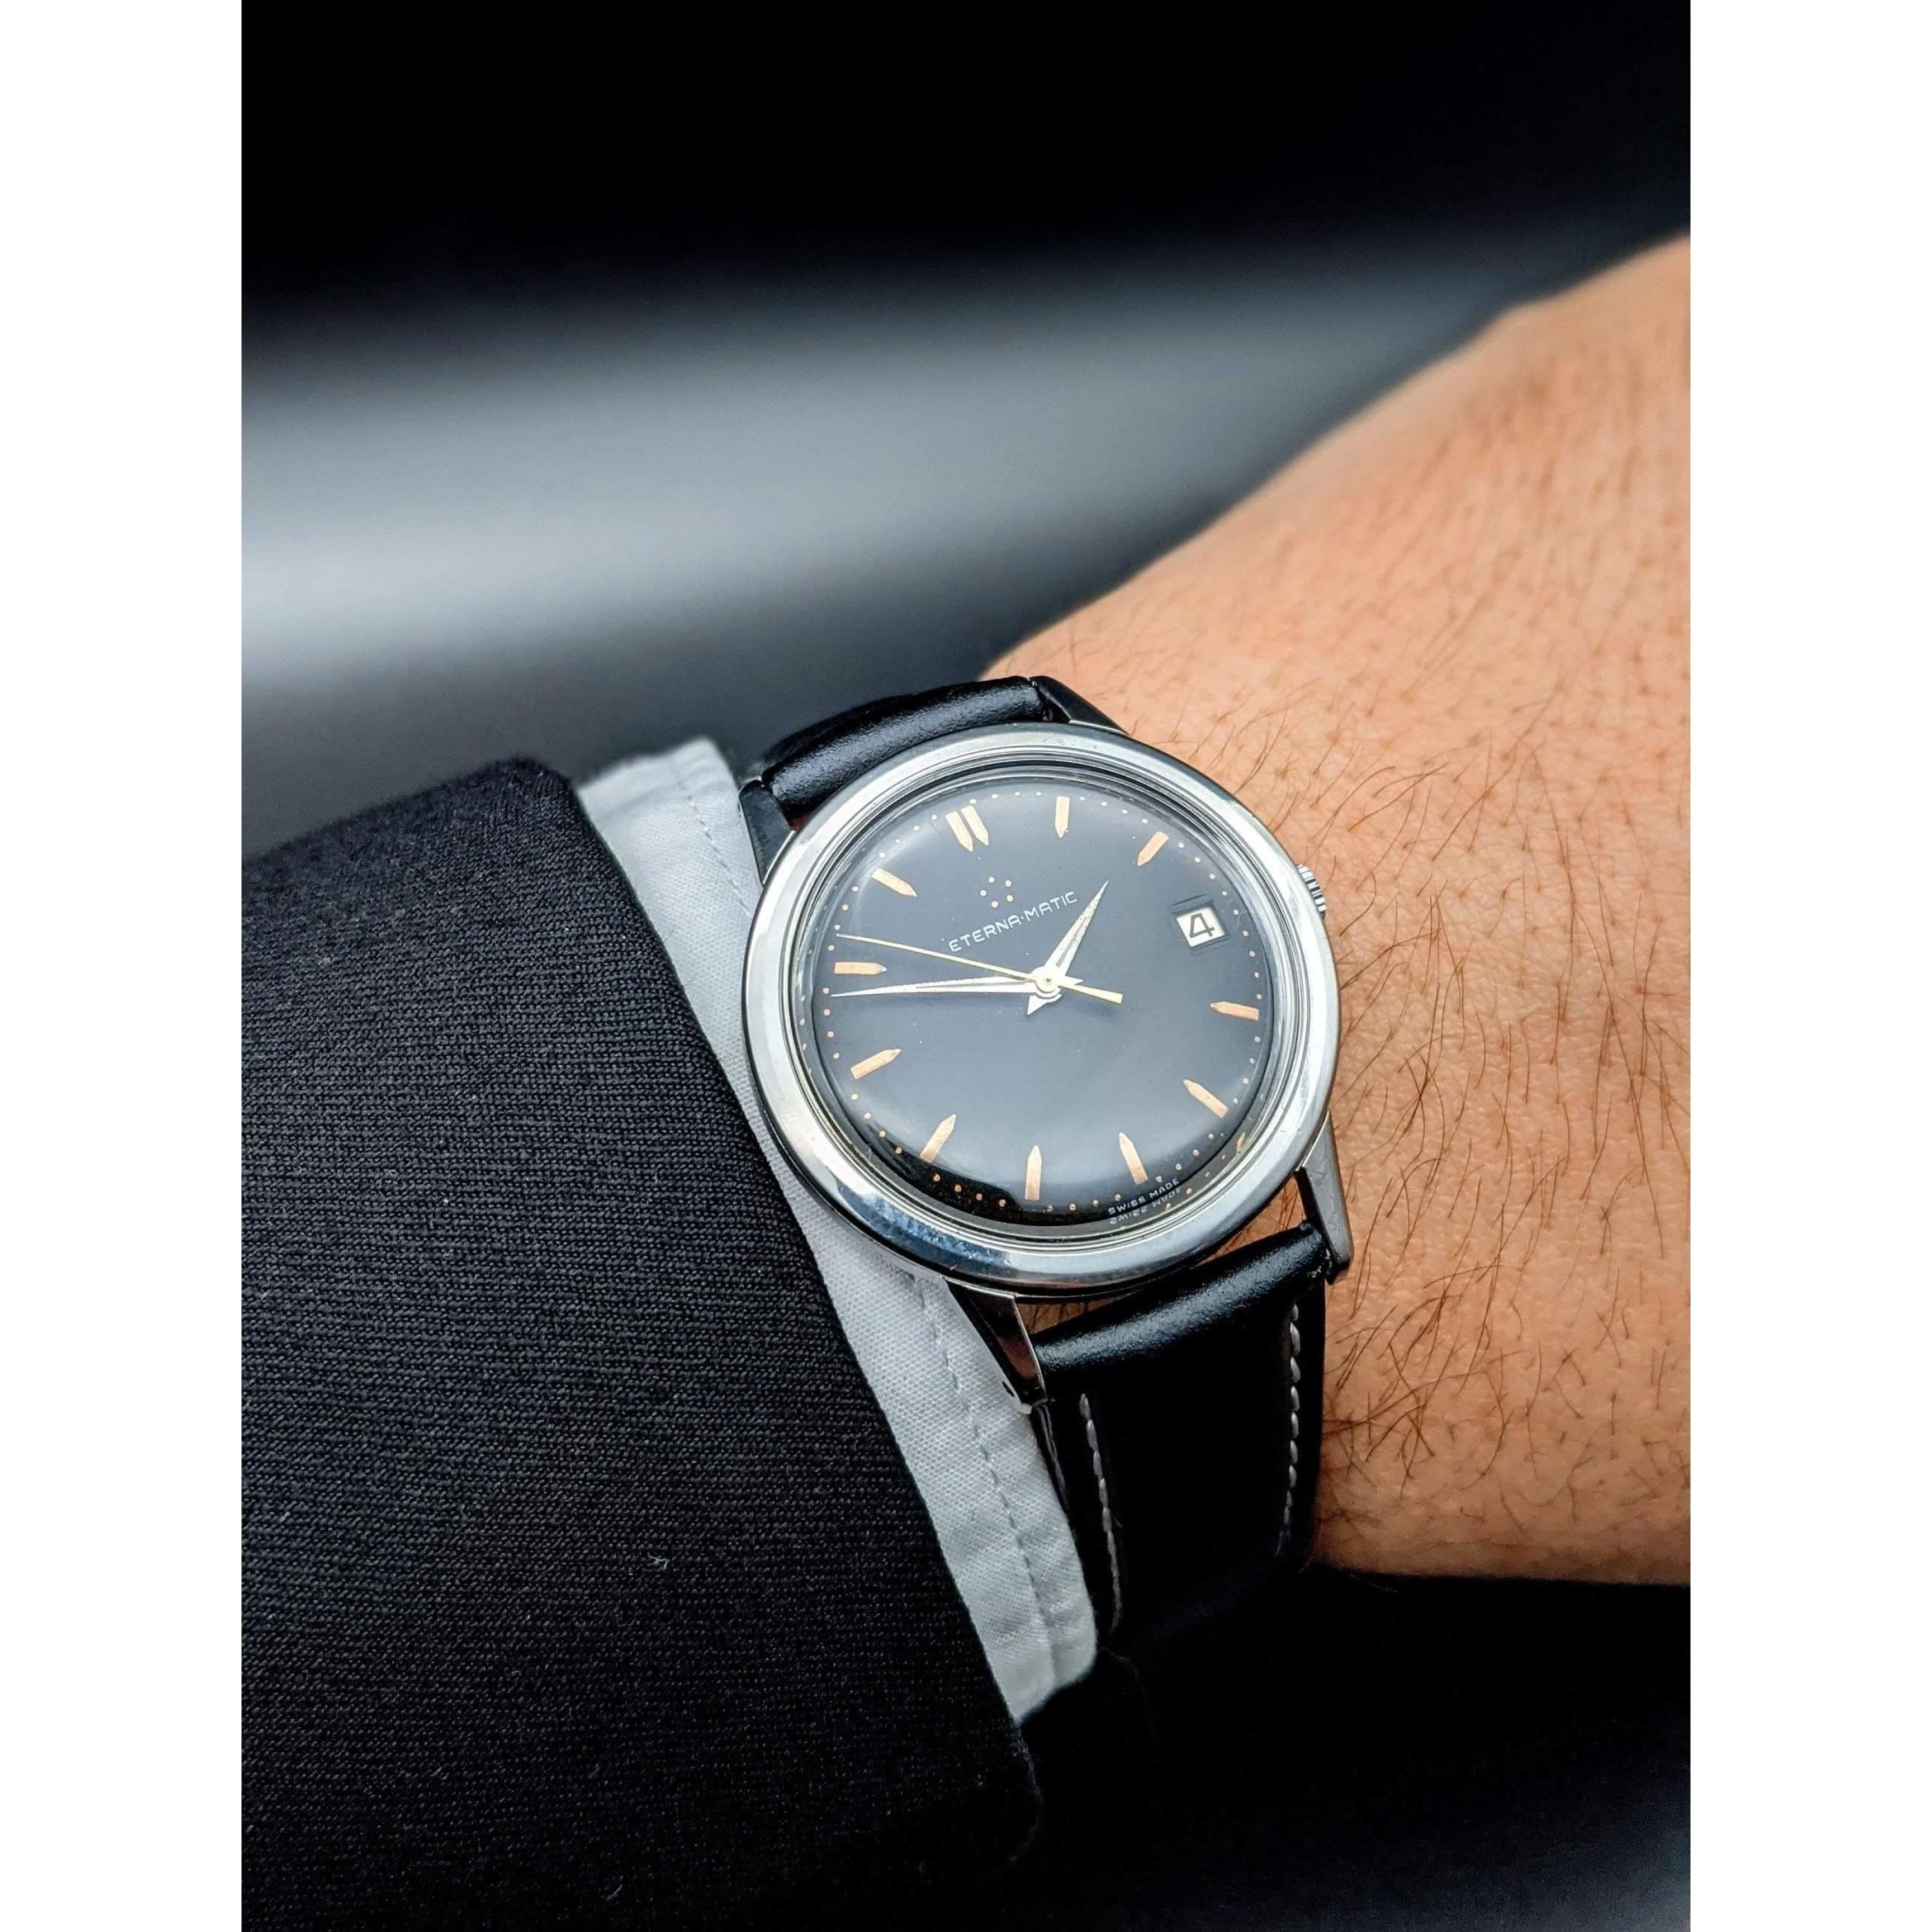 Eterna-Matic Vintage Dress watch – The Watch Collector